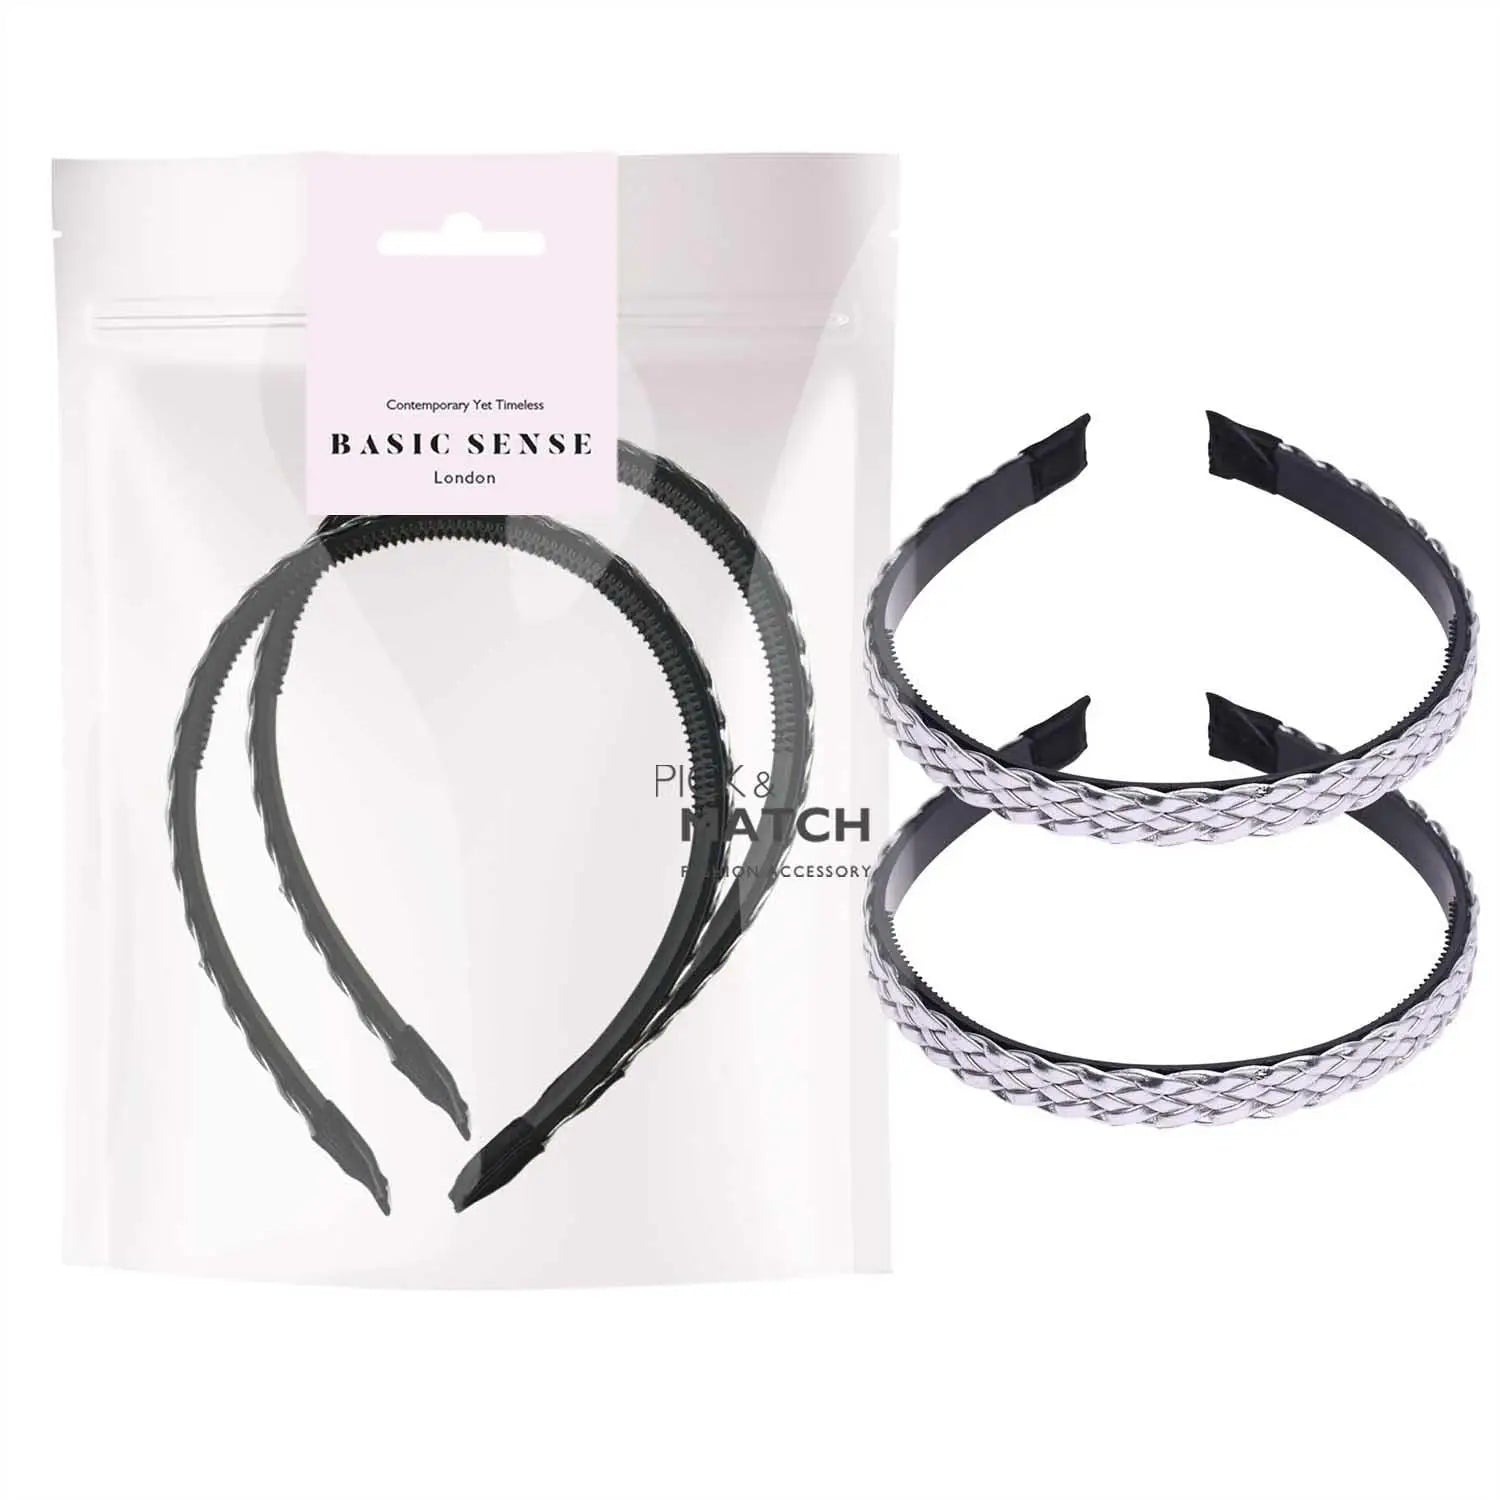 Black and white leather braided headbands with a white bag - 2pcs